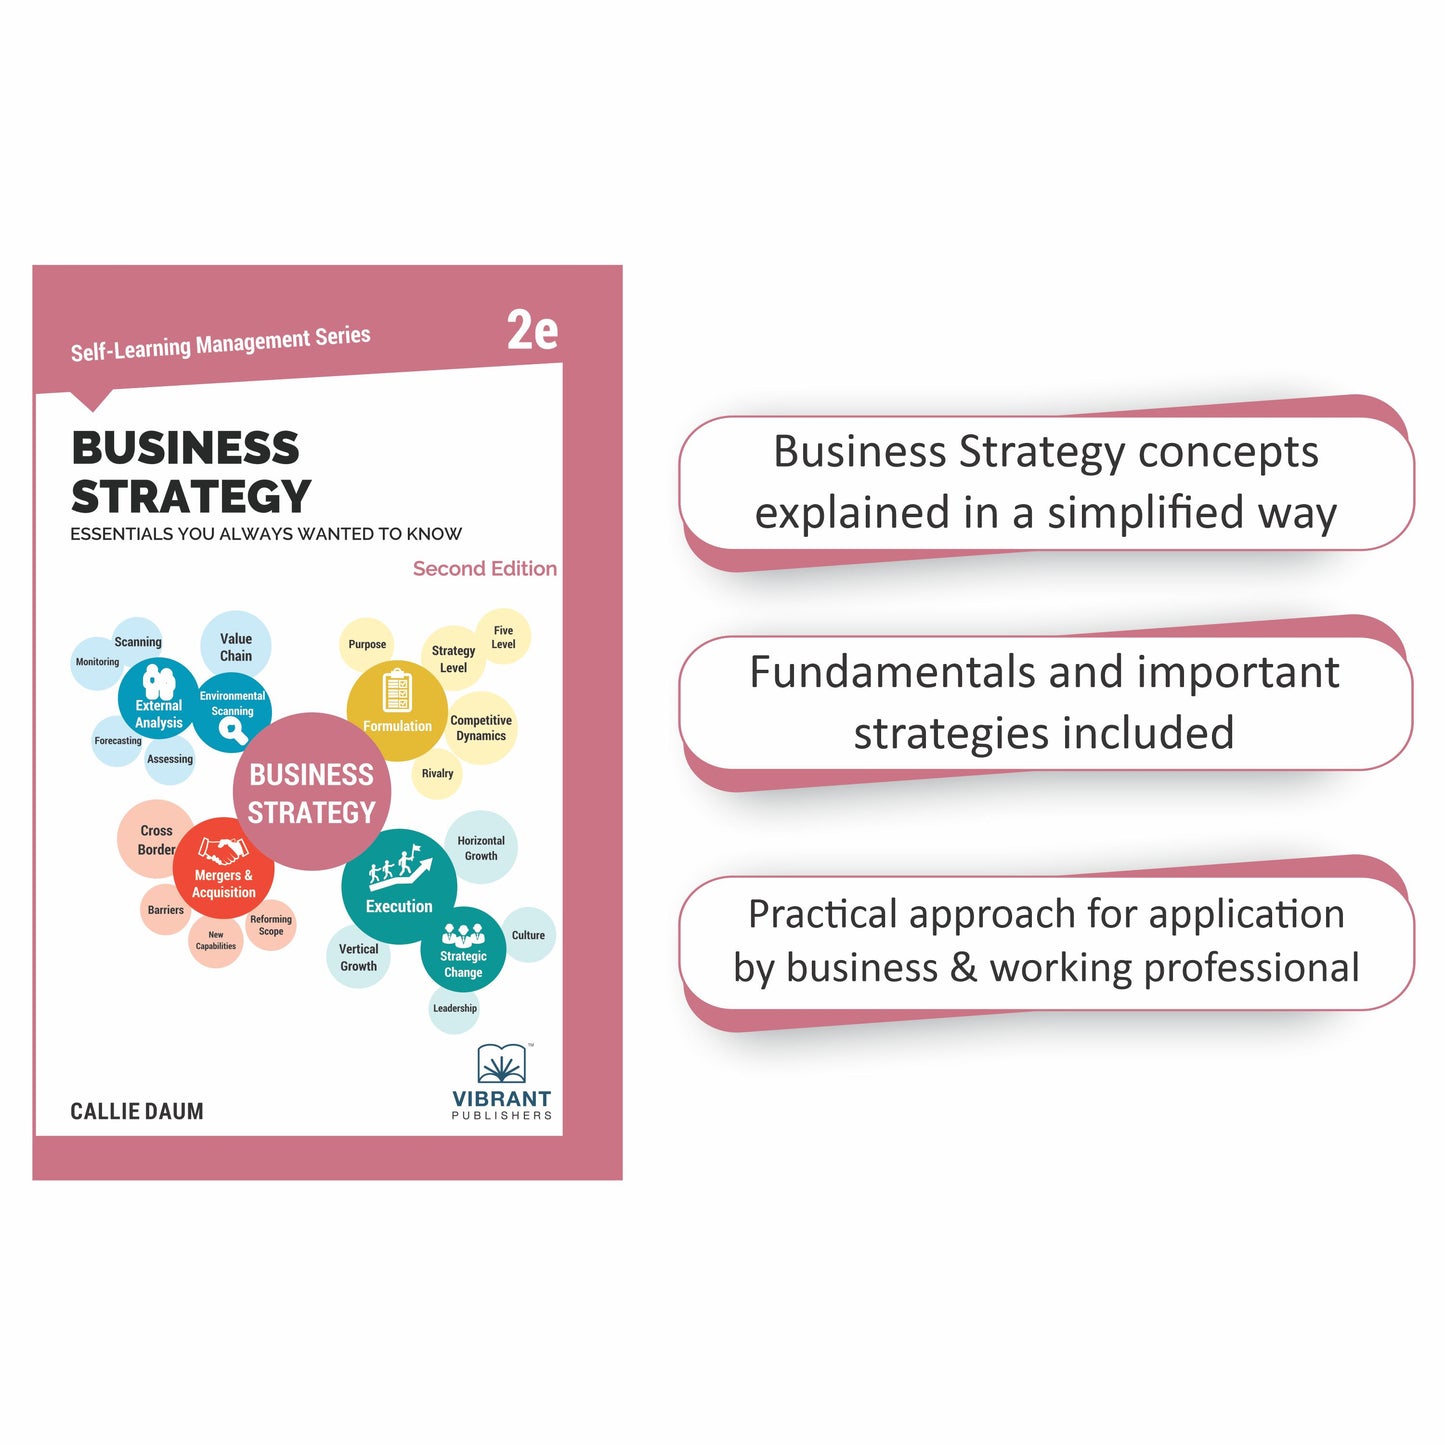 Leadership, Strategy, and Business Law Essentials